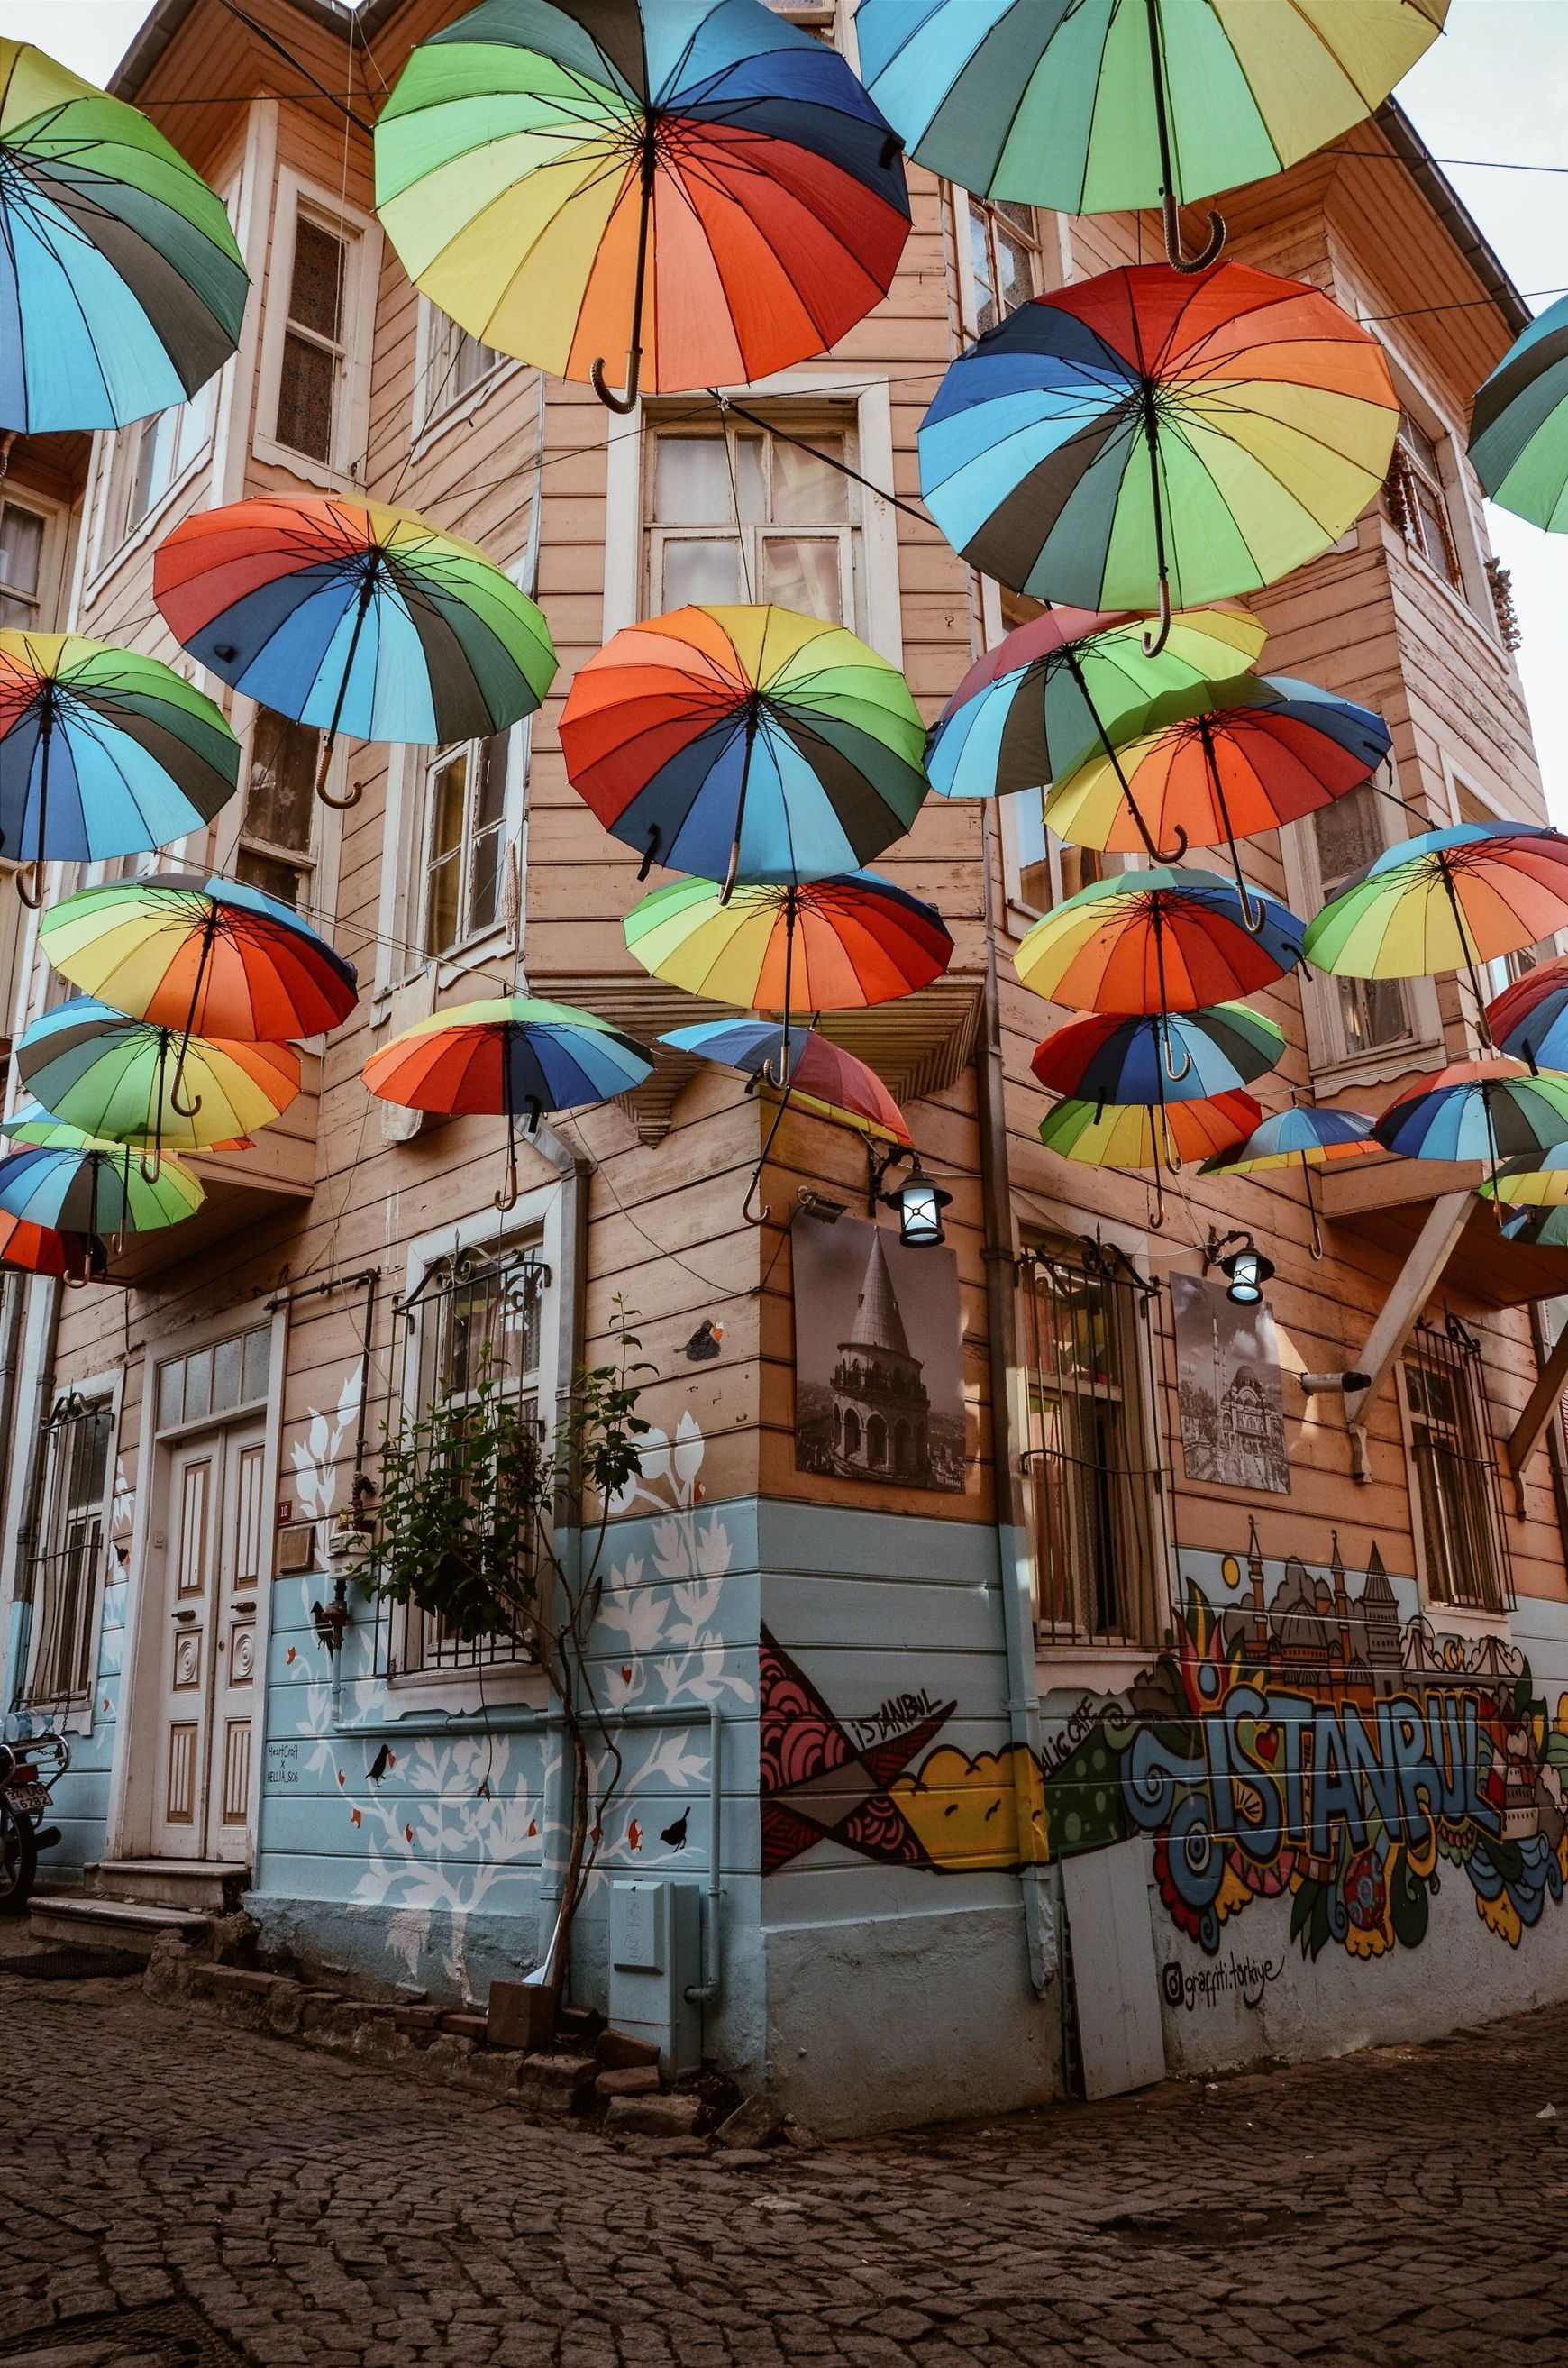 a bunch of colorful umbrellas are hanging up in the street.